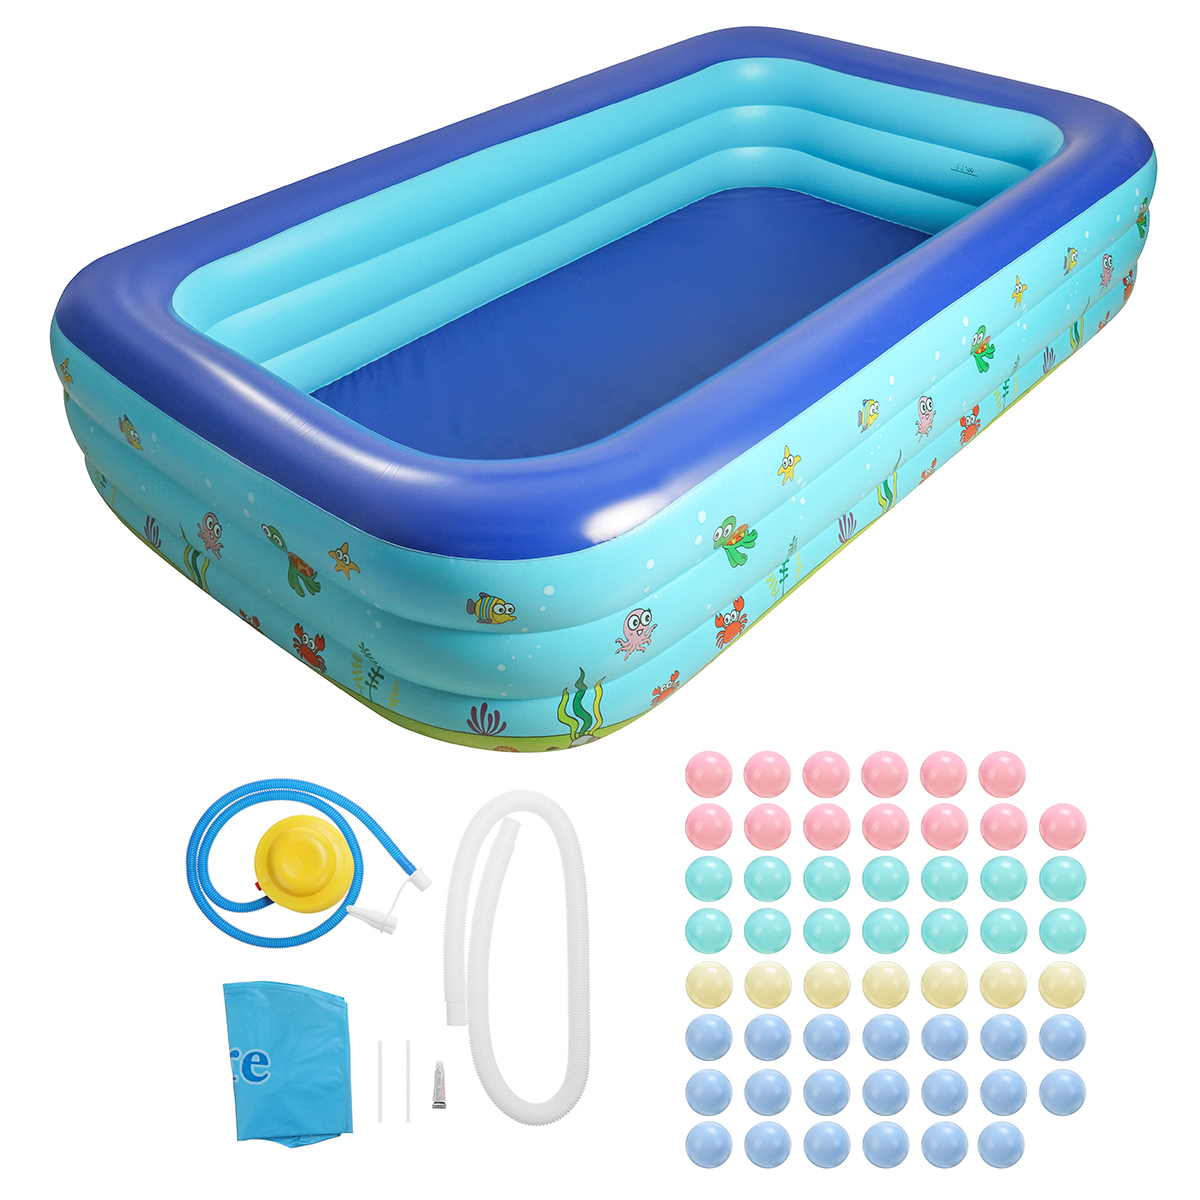 120x72x24inch-Family-Inflatable-Swimming-Pool-Outdoor-Garden-Ground-Swimming-Pool-with-Filter-Pump-1697937-5